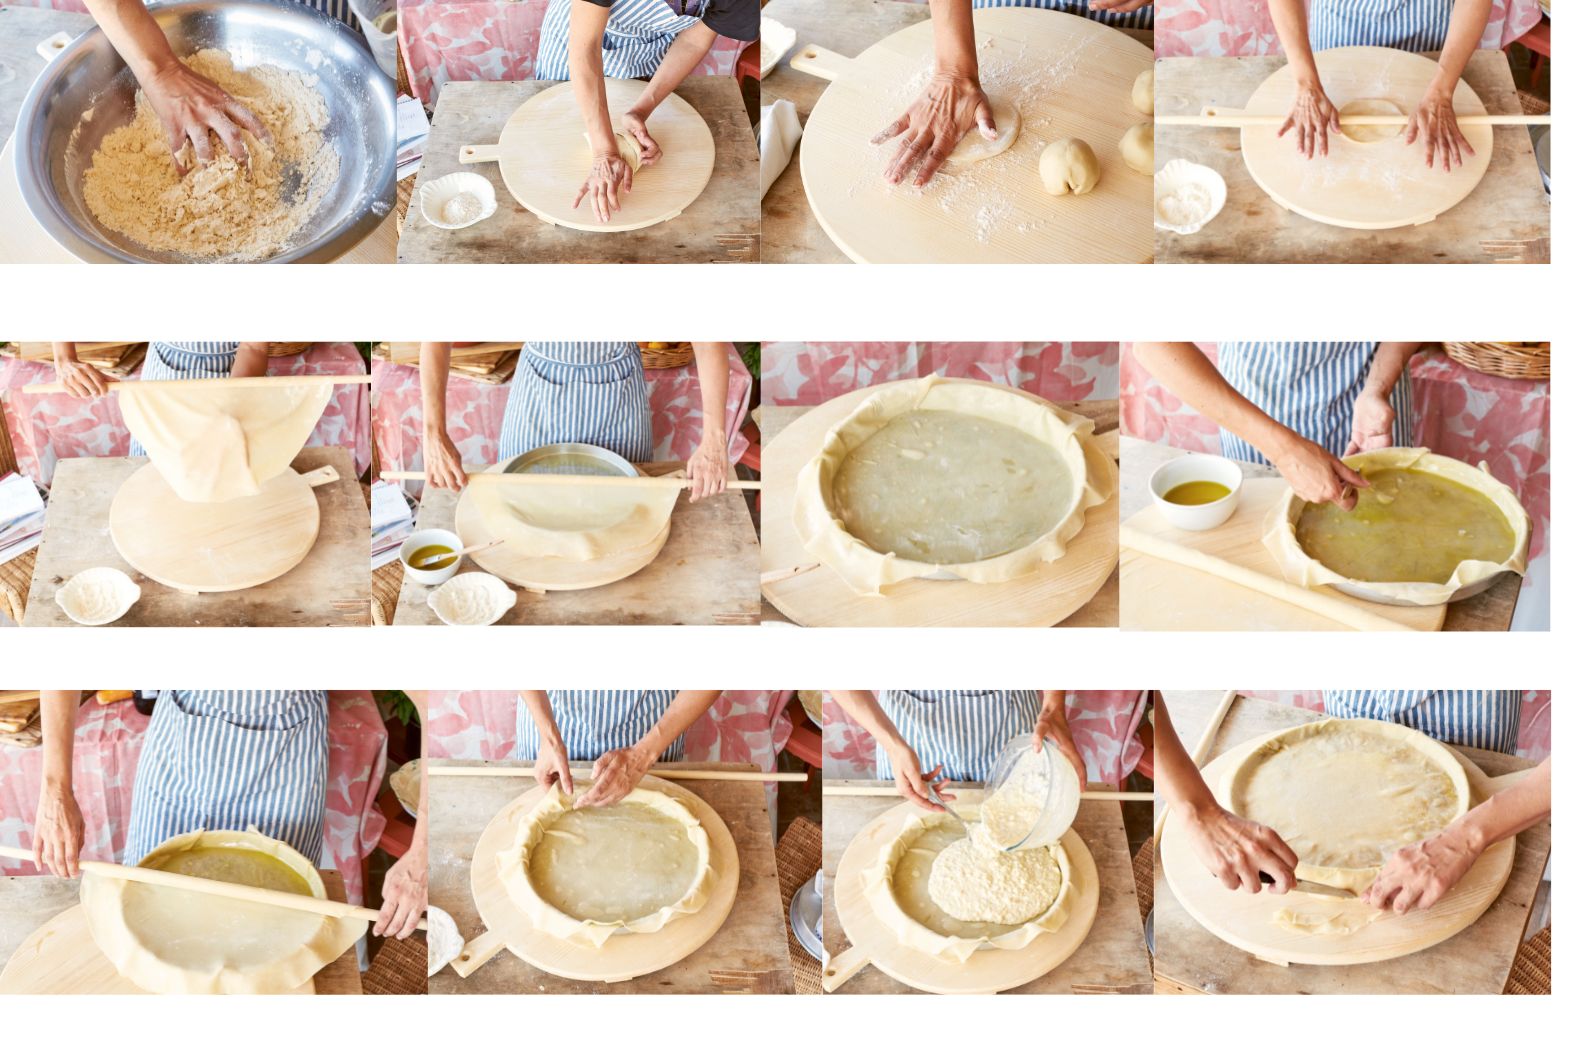 How to make filo pastry - step by step guide from Greek chef Carolina Doriti